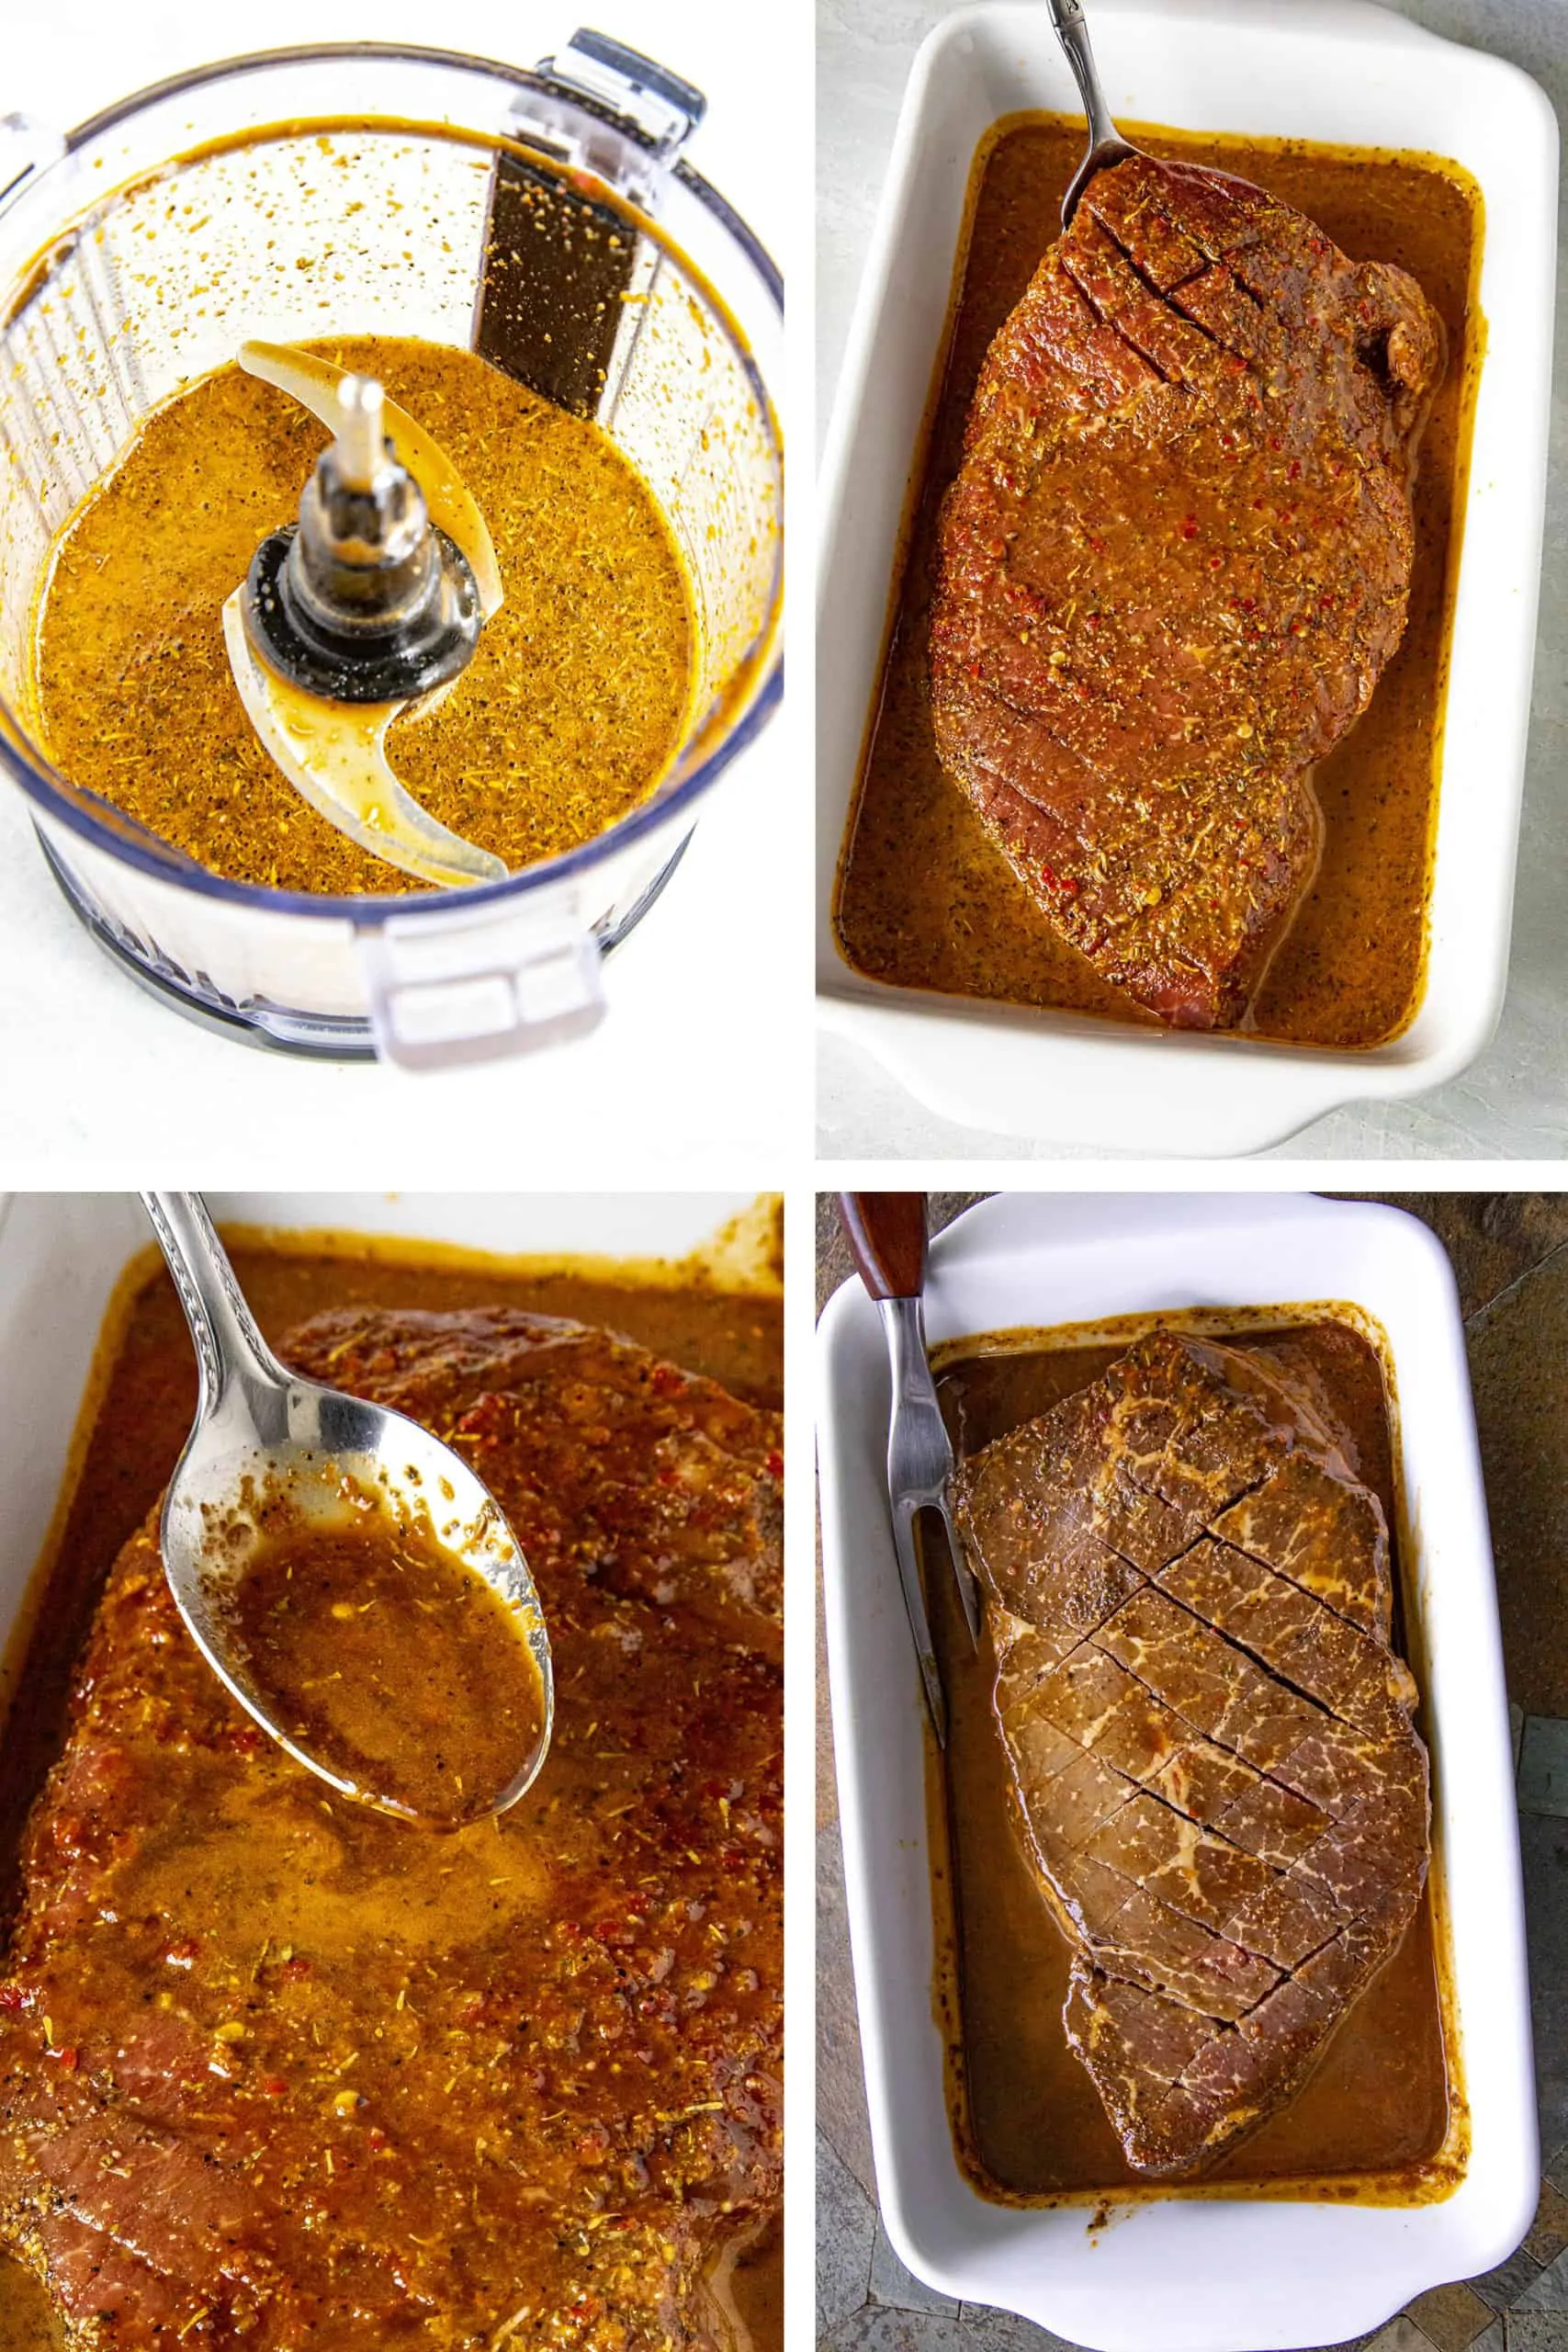 Steps of making the London Broil Marinade